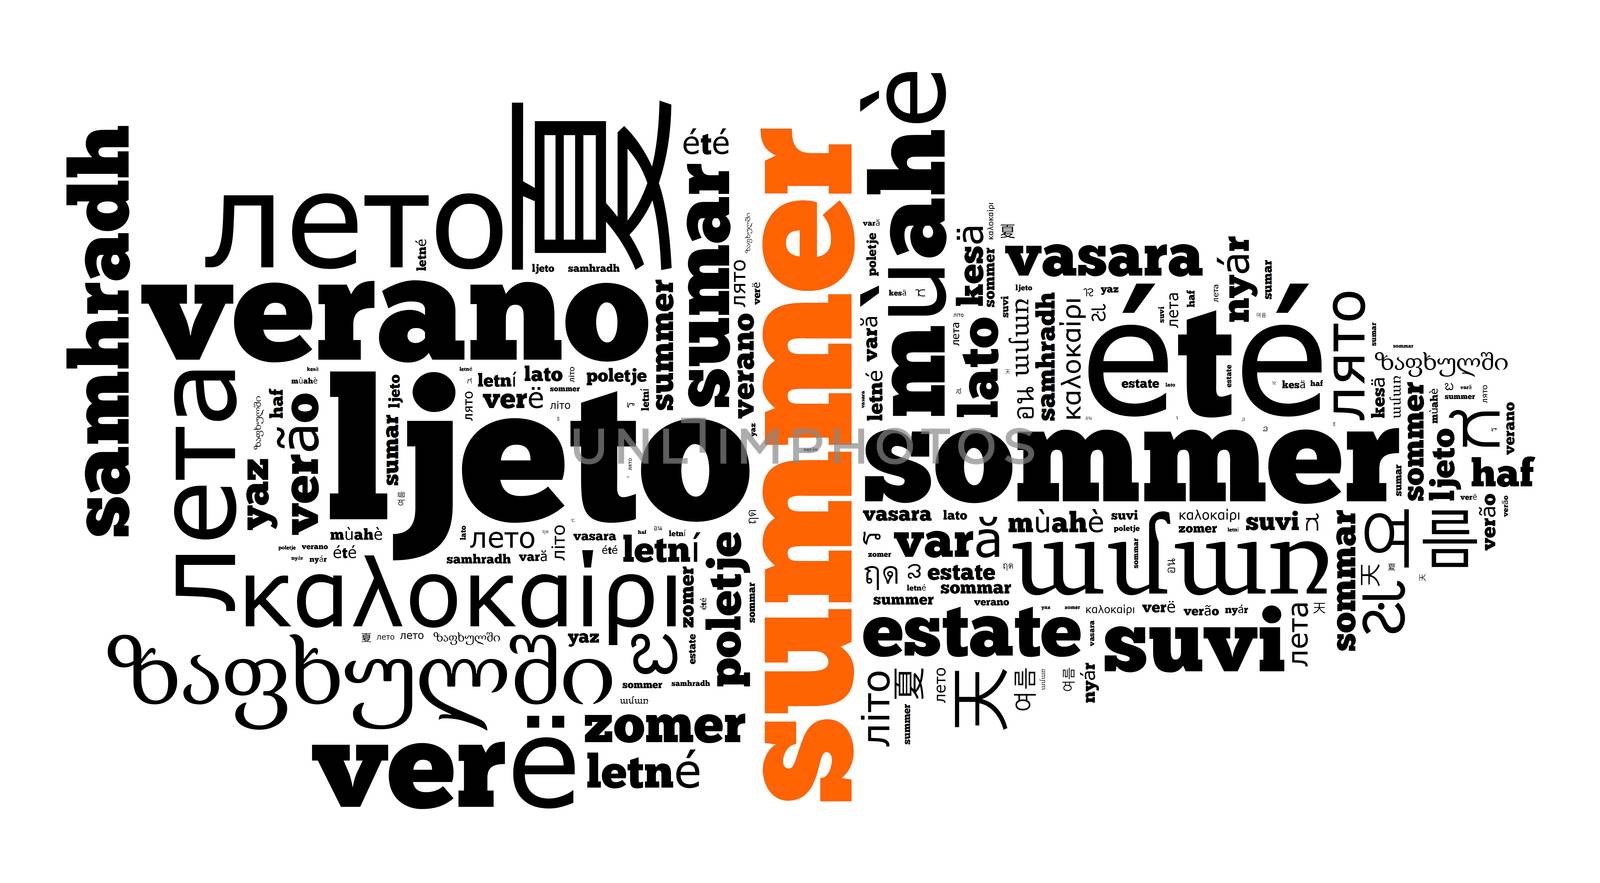 Word Summer in different languages word cloud concept